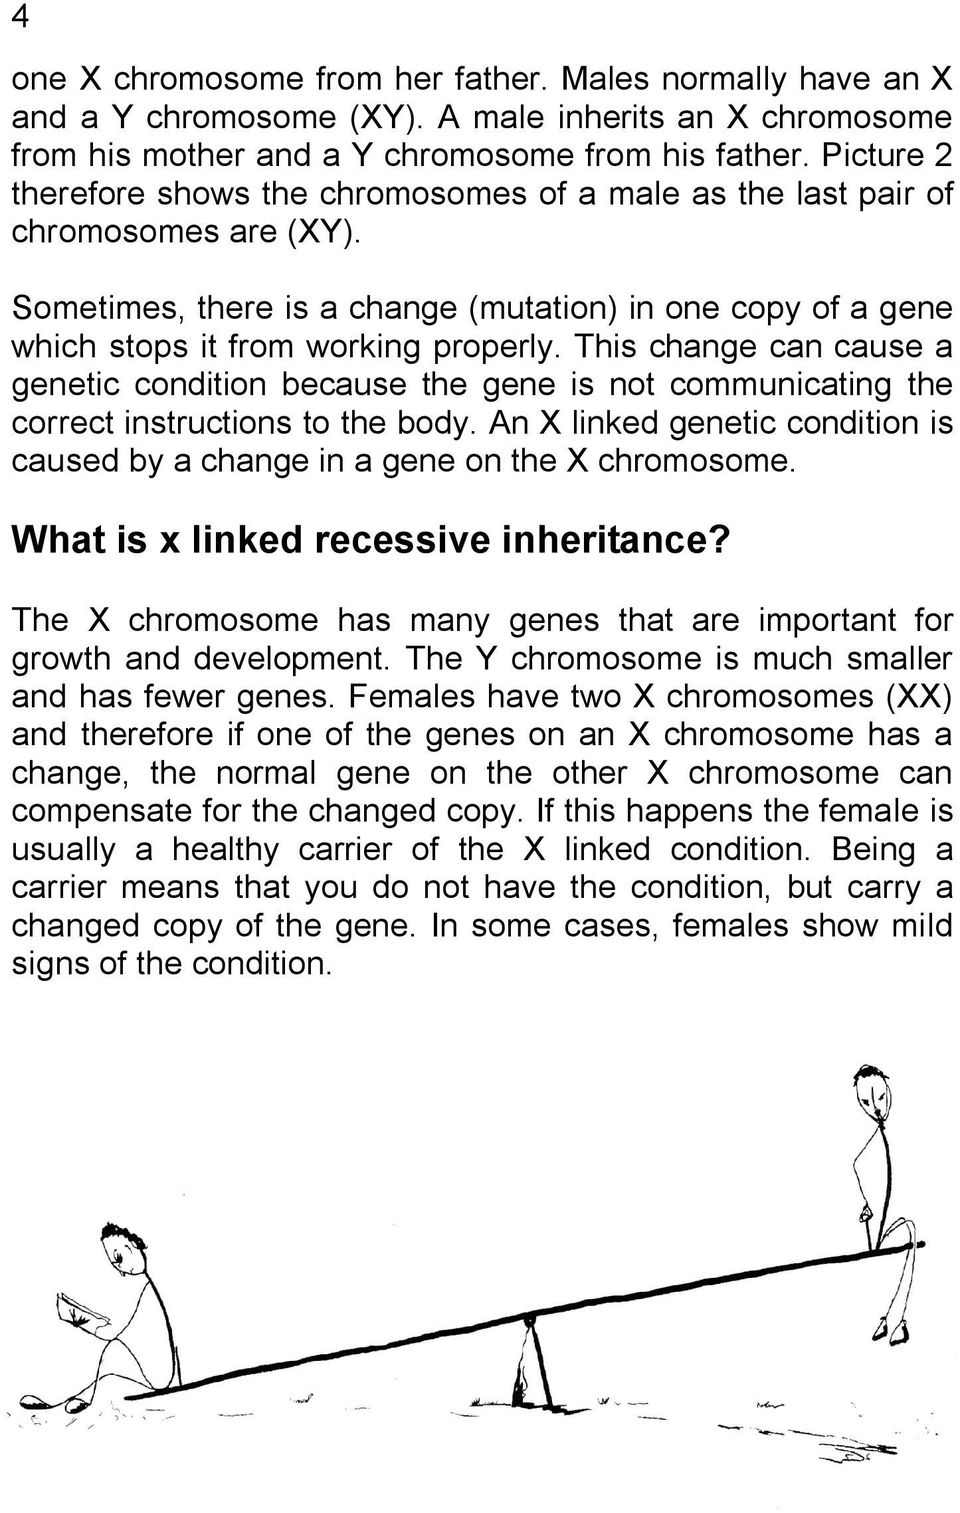 This change can cause a genetic condition because the gene is not communicating the correct instructions to the body. An X linked genetic condition is caused by a change in a gene on the X chromosome.